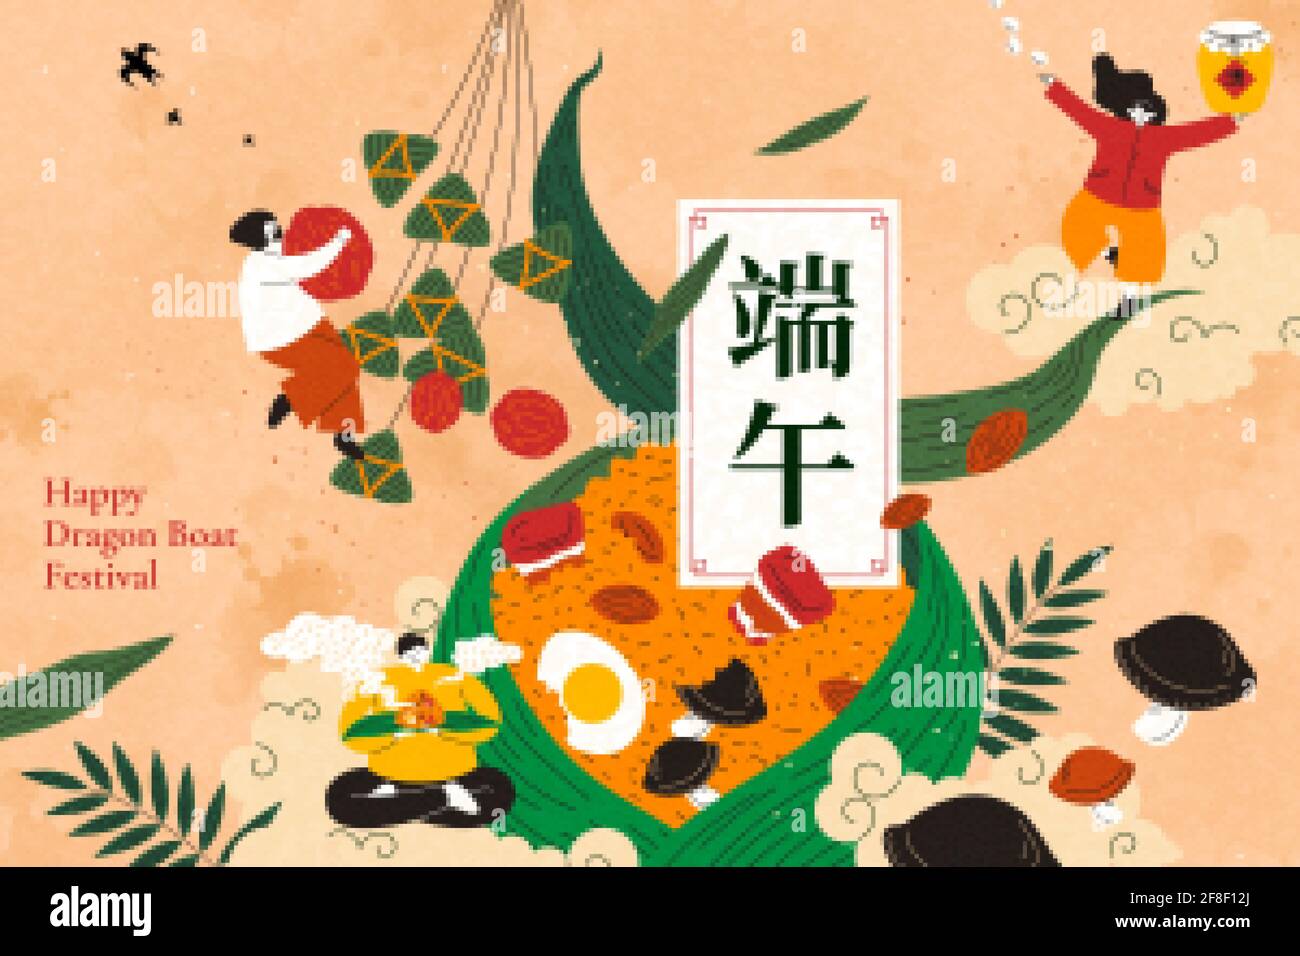 People enjoy giant traditional food rice dumpling as celebration for Dragon Boat Festival. Duanwu holiday name written in Chinese Stock Vector